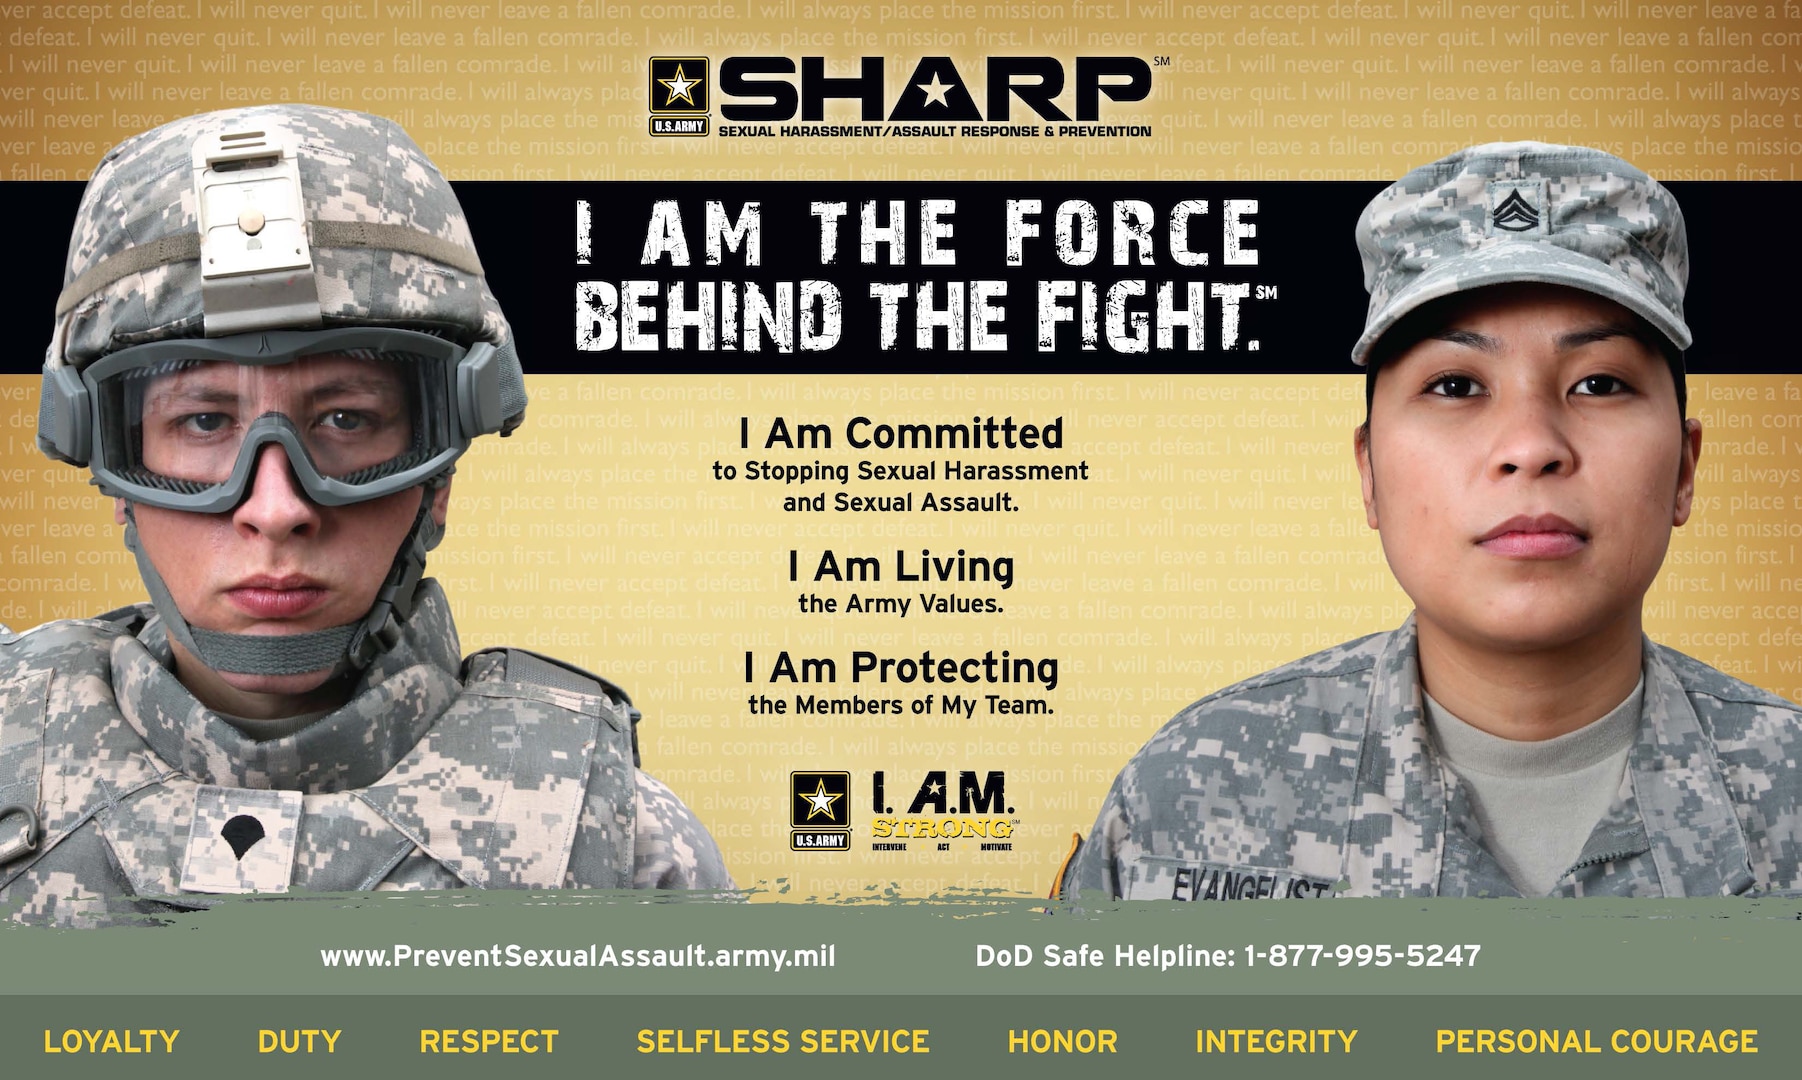 If you or someone you know is in need of support after a sexual assault, call the Department of Defense 24/7 Safe Helpline at 877-995-5247 or the Joint Base San Antonio 24/7 Sexual Assault Hotline at 210-808-SARC (7272). 
